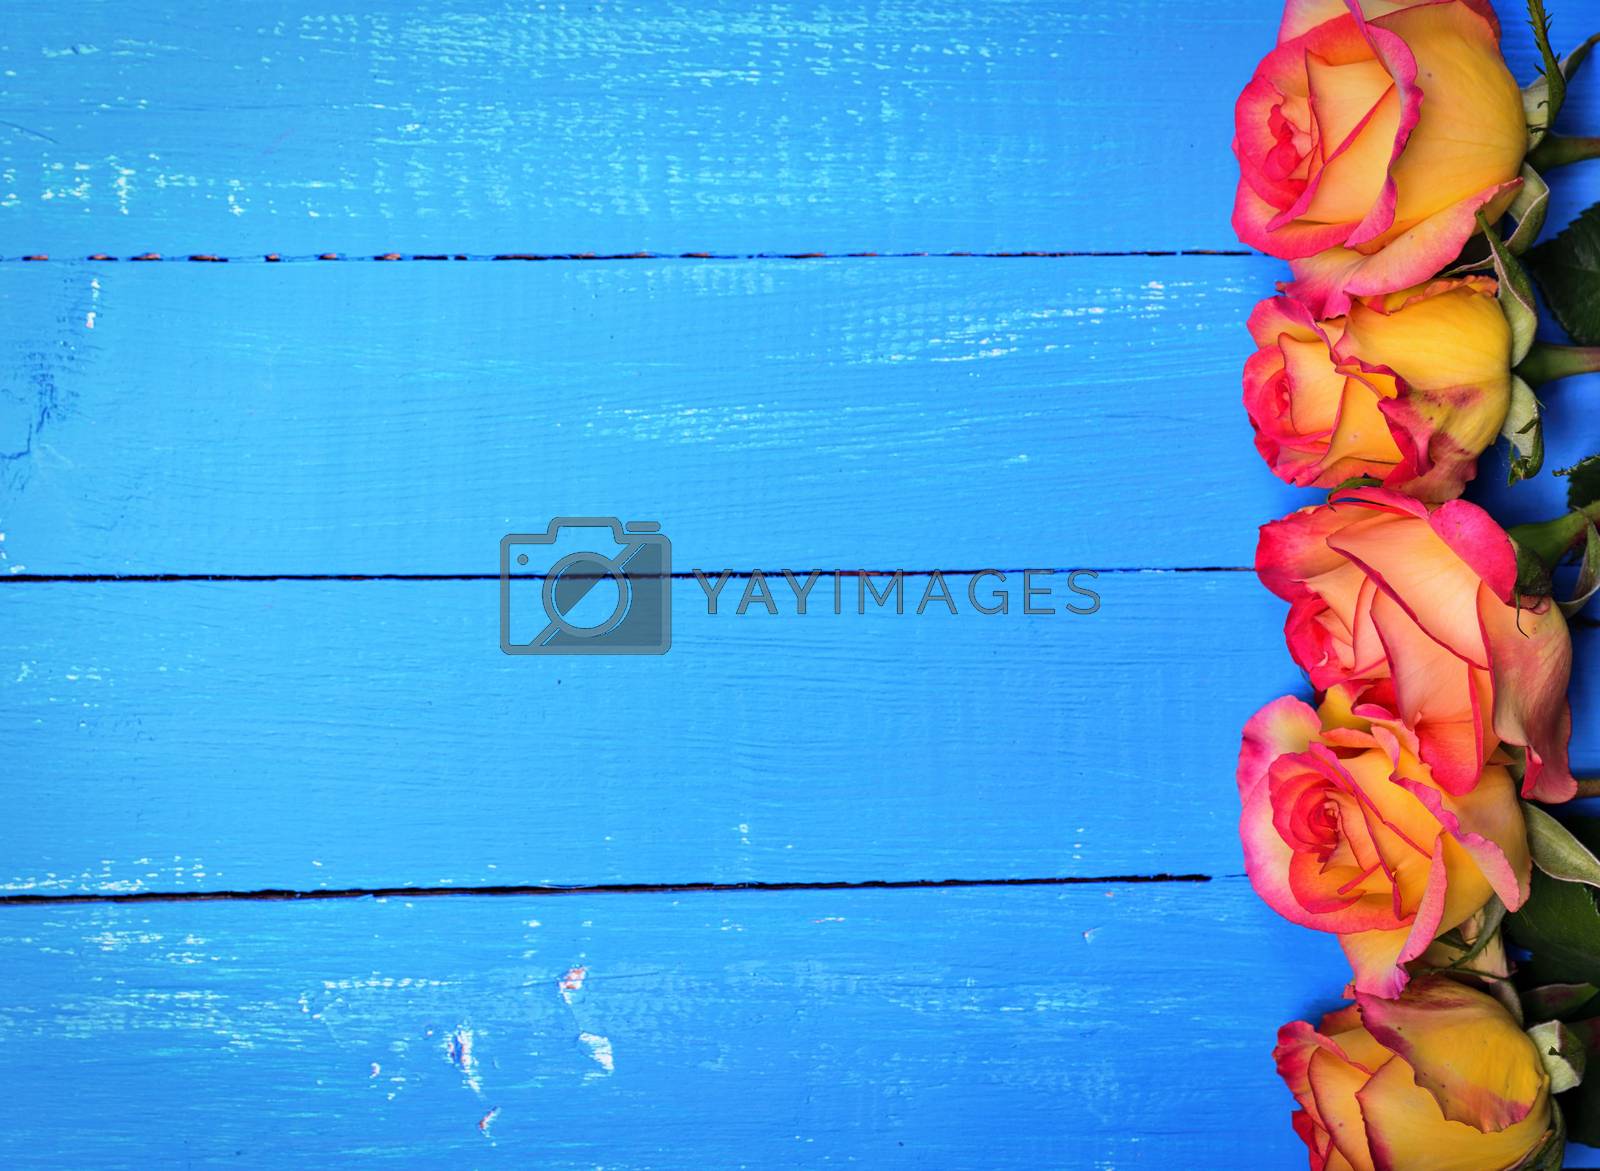 Royalty free image of Flowering yellow roses on a blue wooden background by ndanko